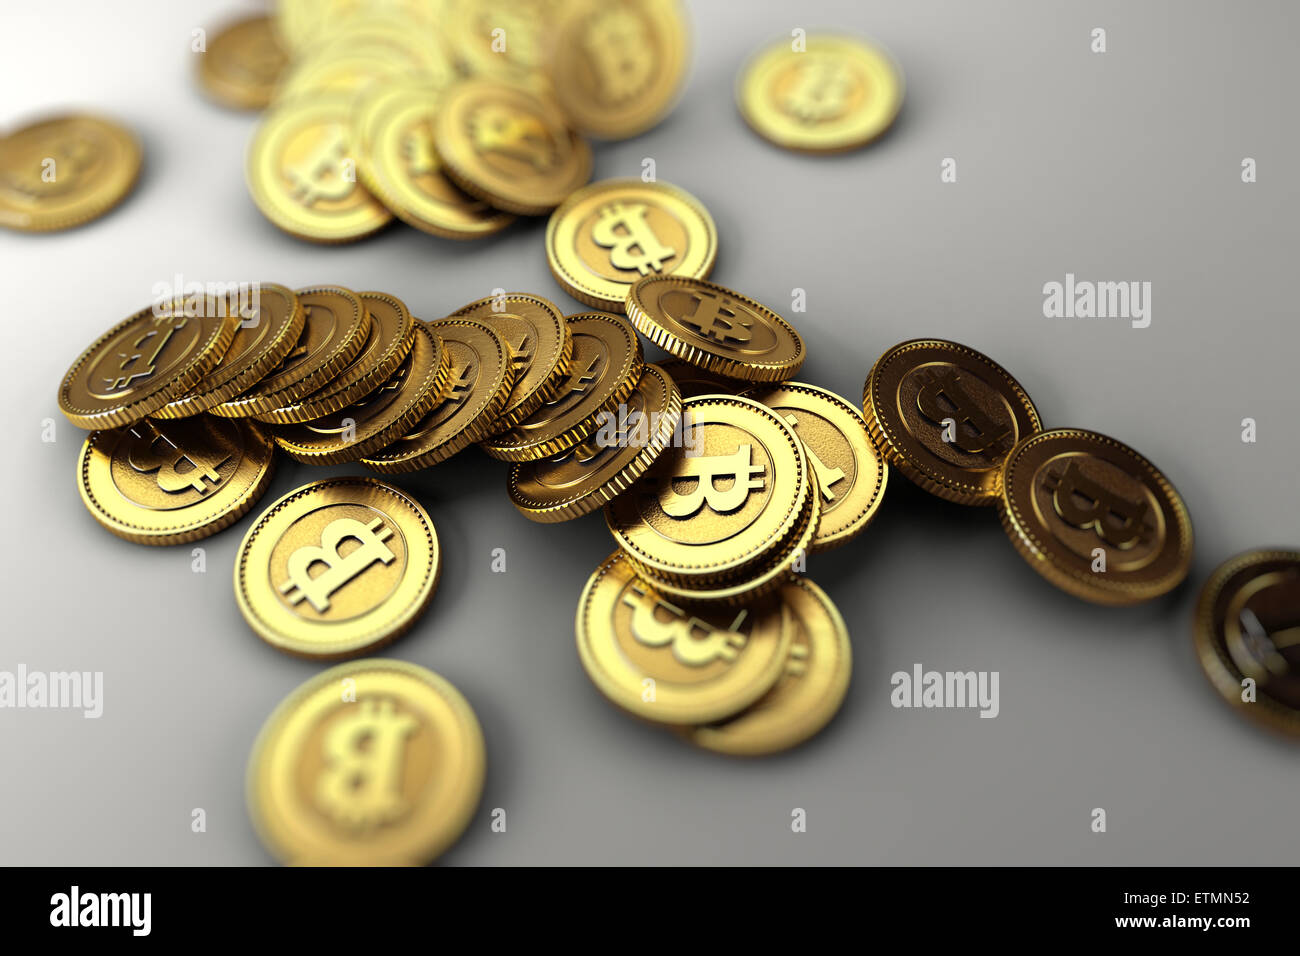 Stylized representation of Bitcoin, a digital currency. Stock Photo